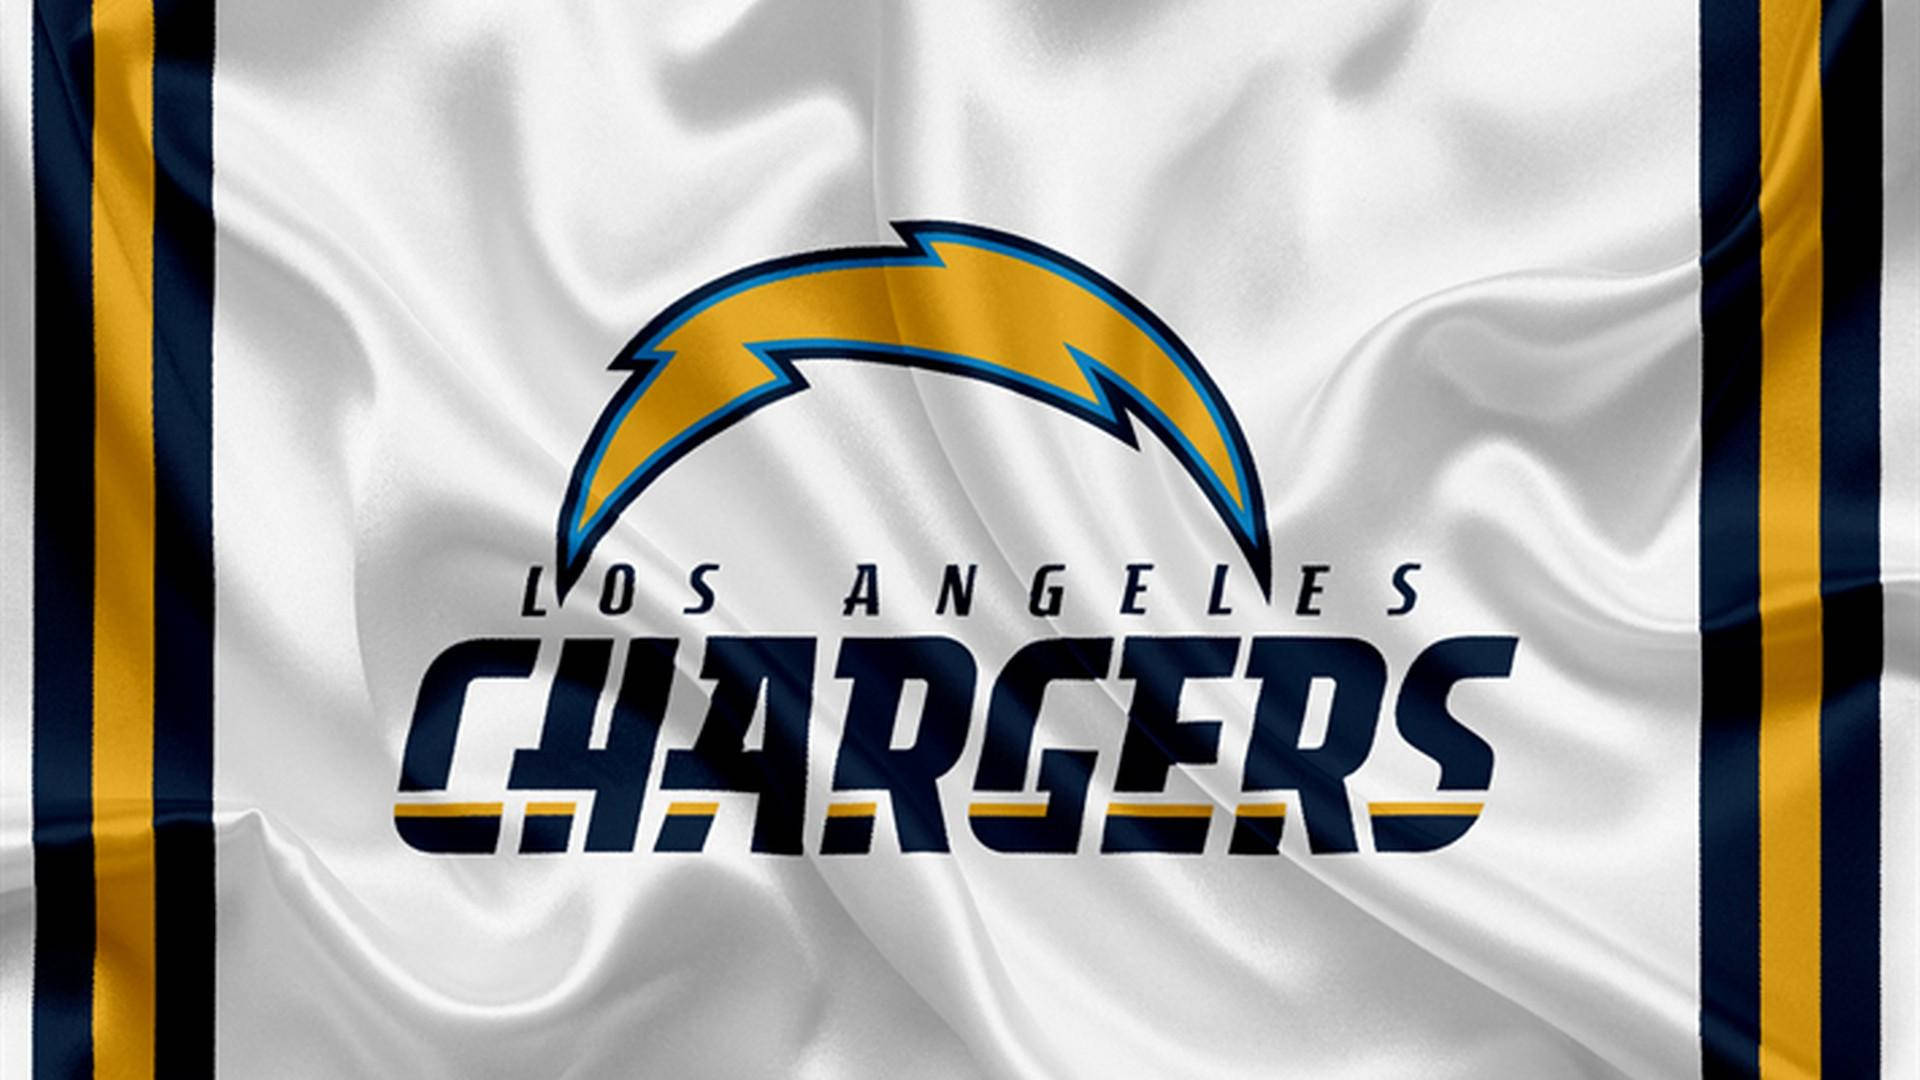 Los Angeles Chargers Beautiful Logo Wallpaper